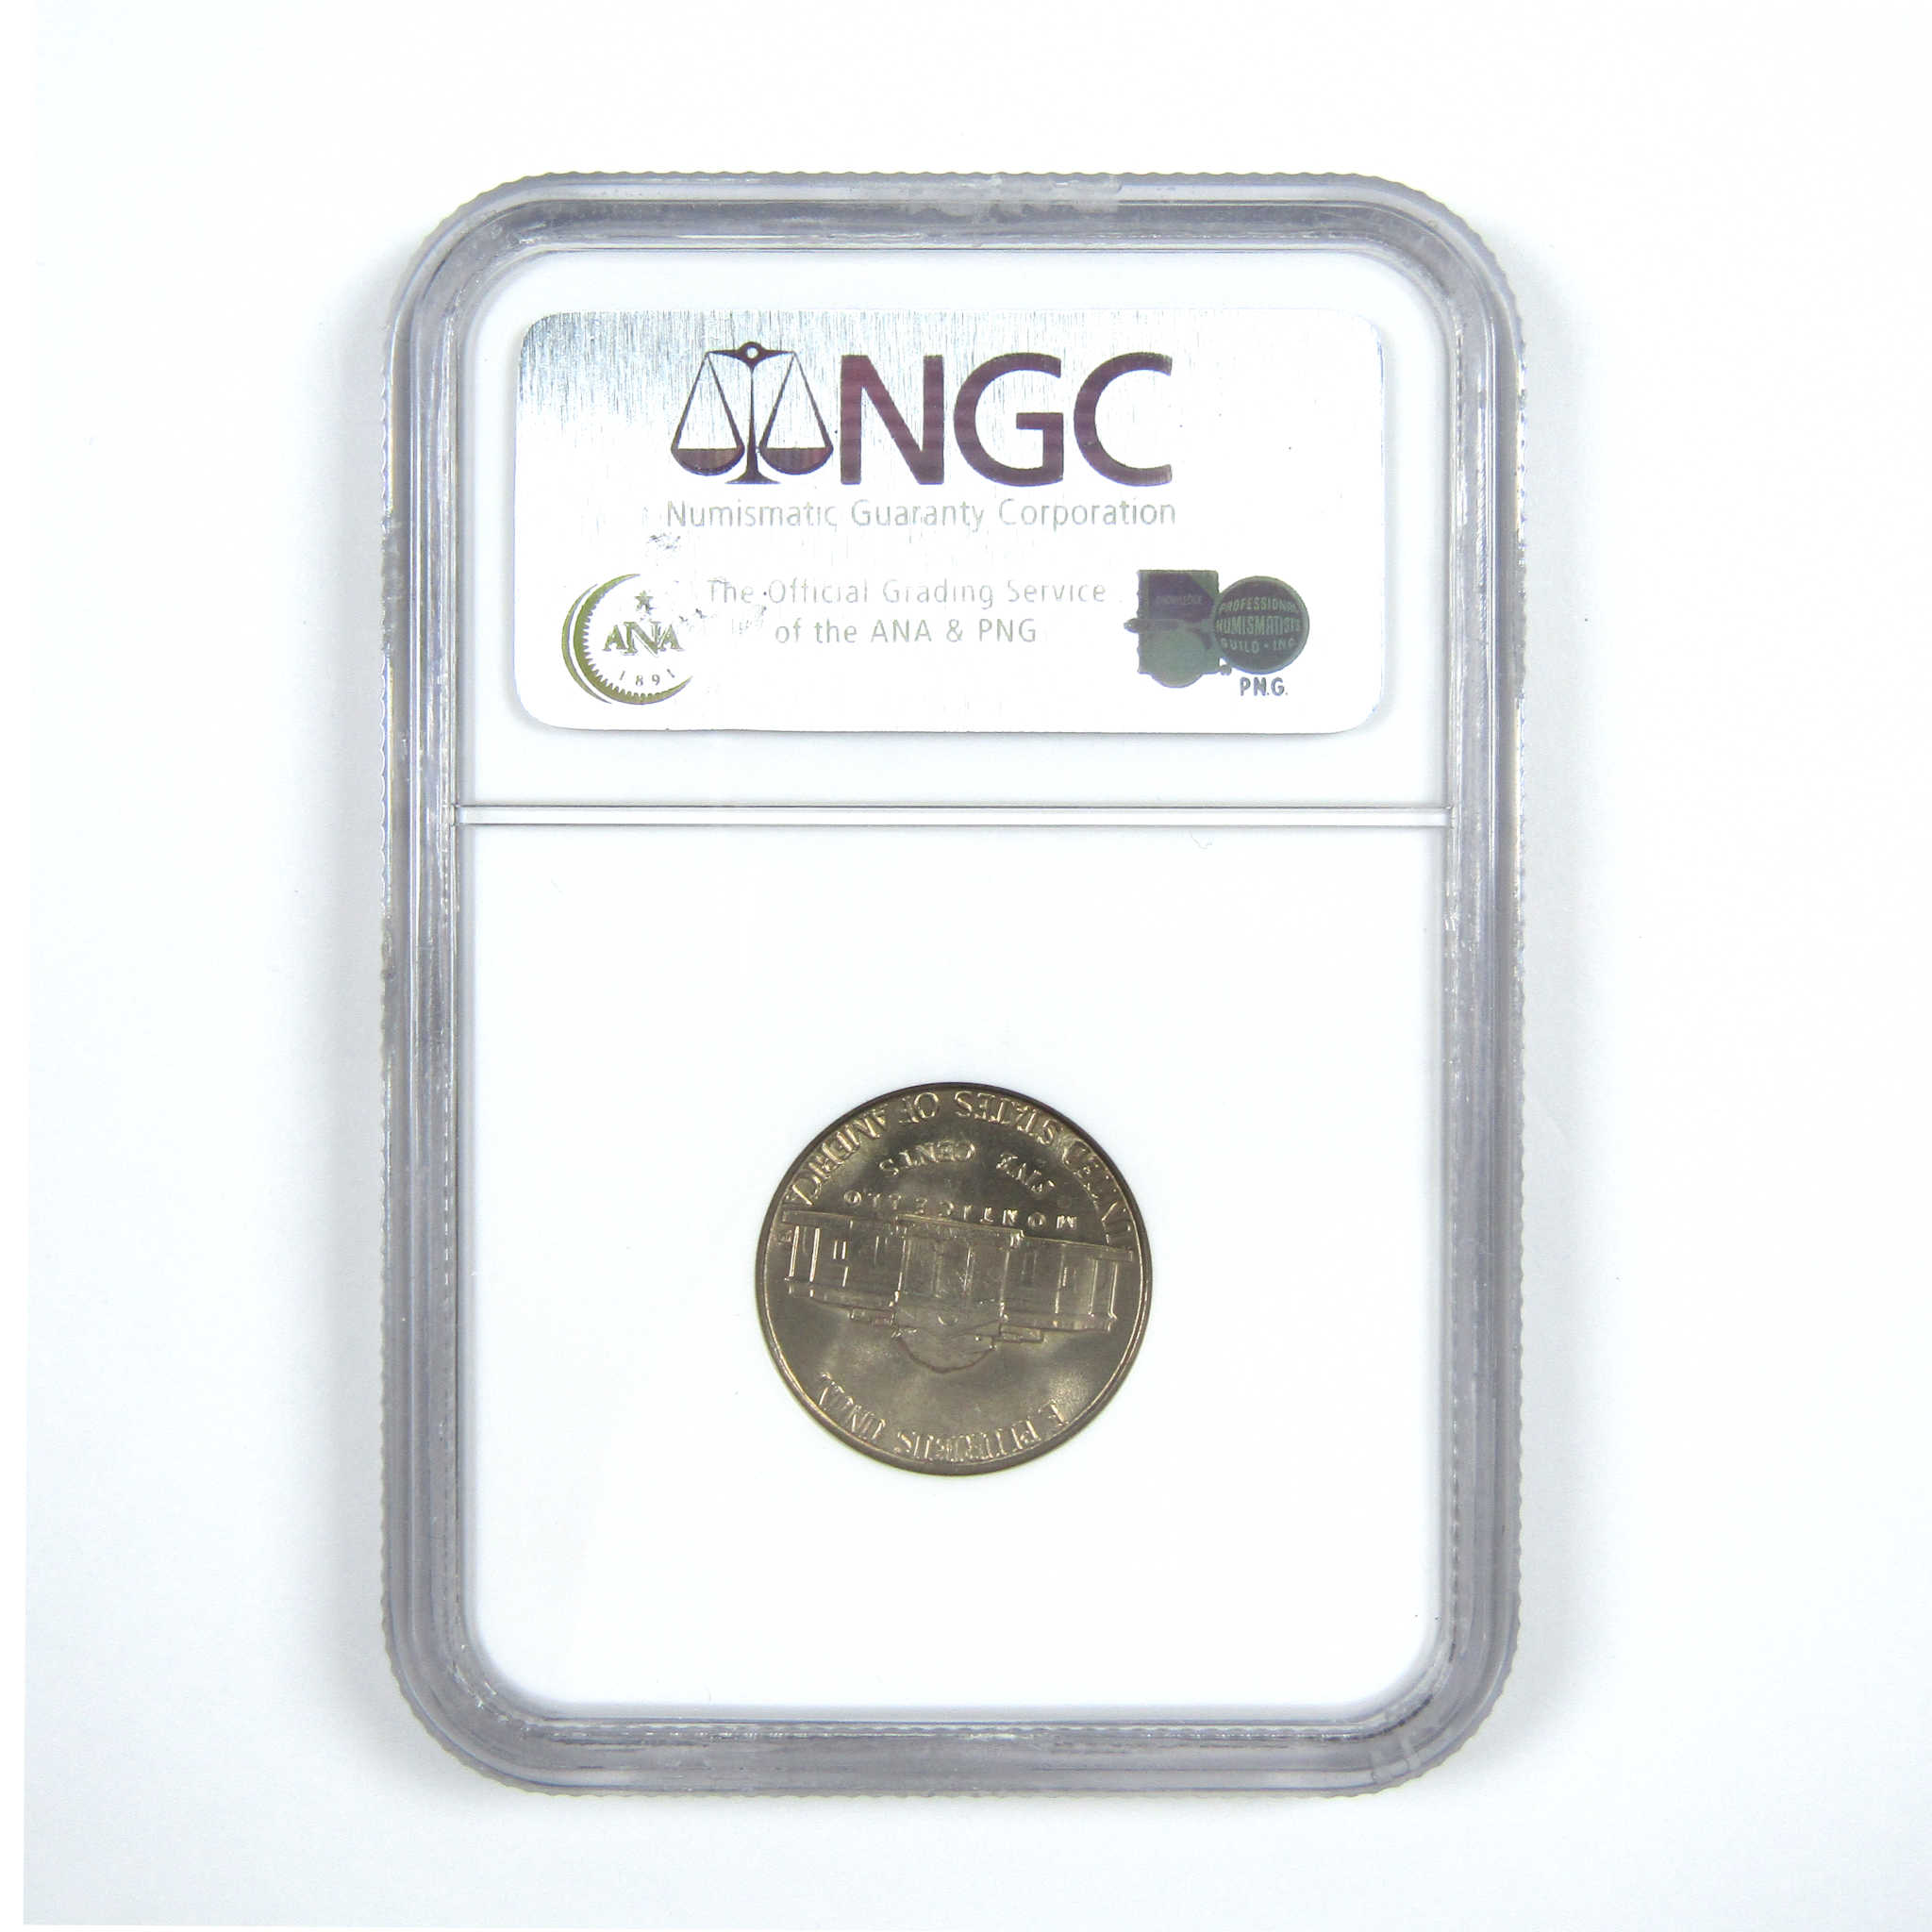 1946 D Jefferson Nickel MS 66 NGC 5c Uncirculated Coin SKU:CPC7362